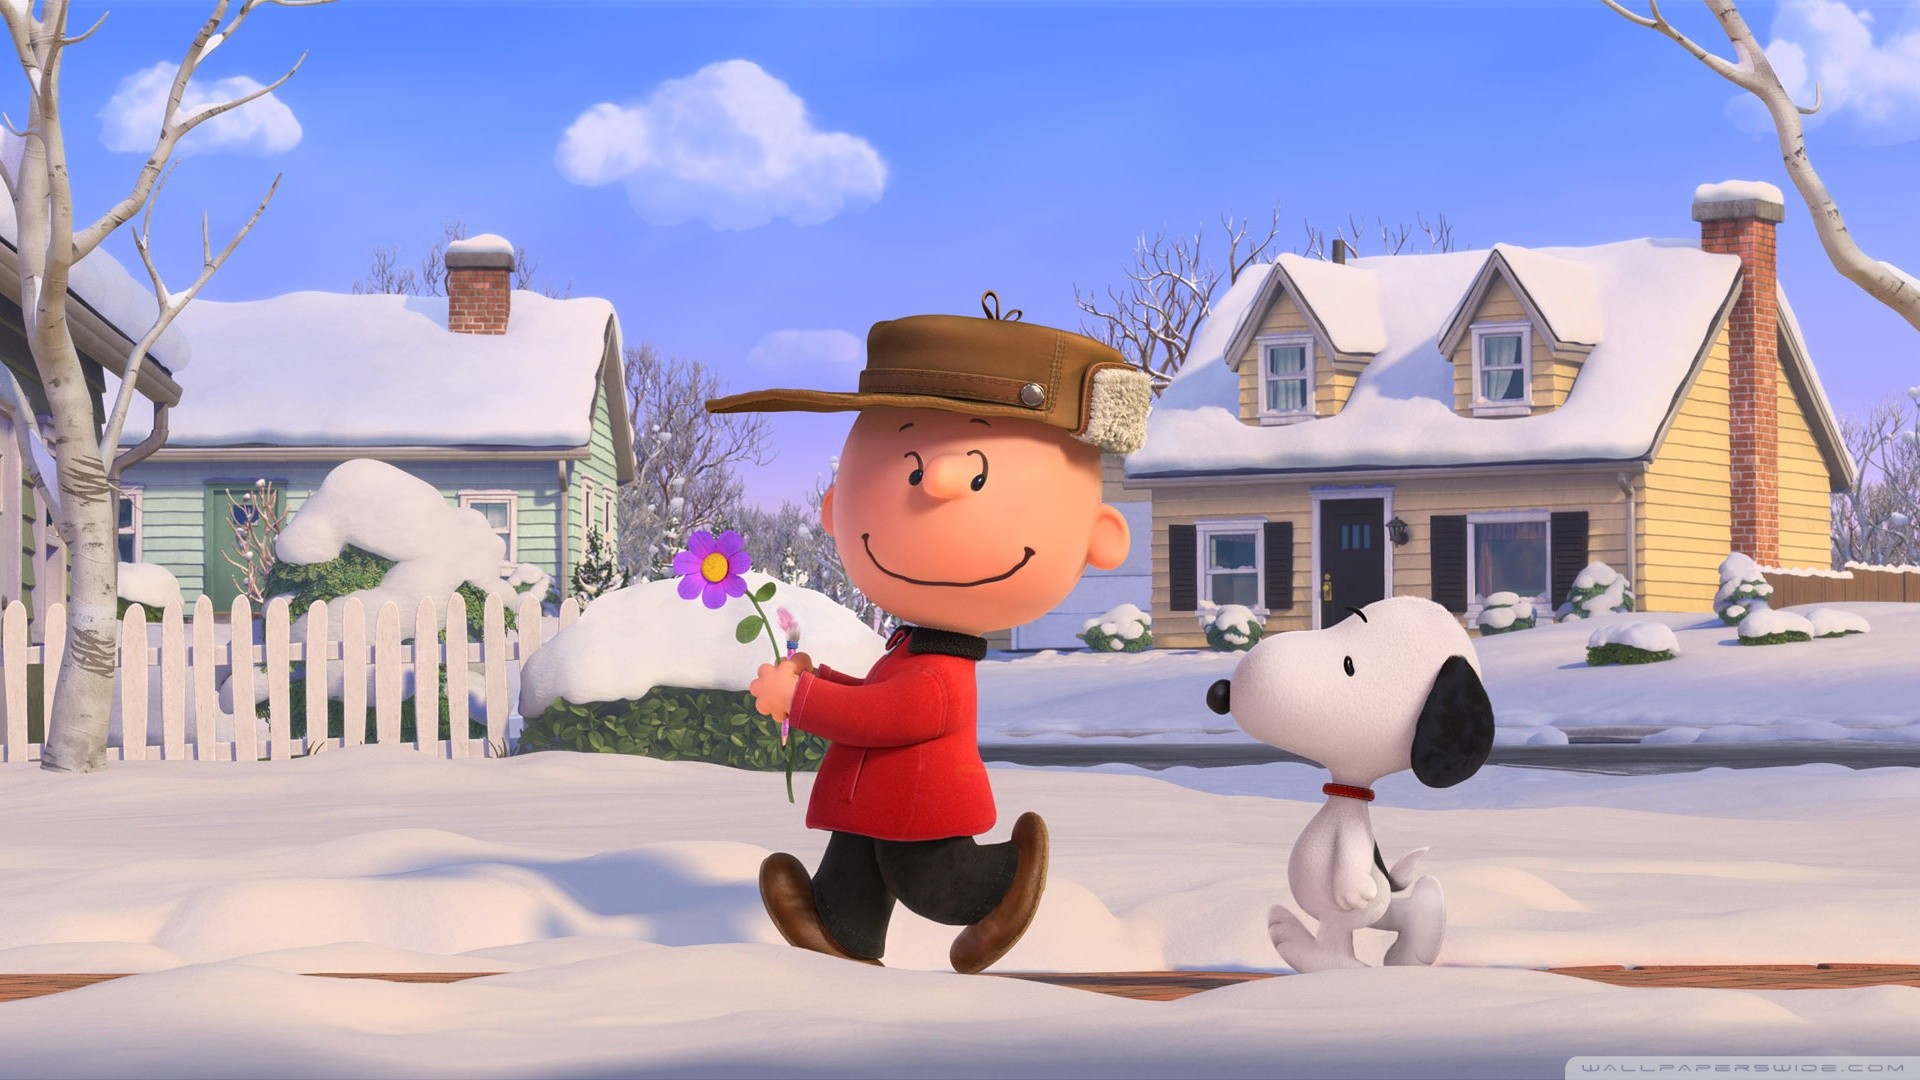 1920x1080 The Peanuts Movie 2015 HD Wide Wallpaper for Widescreen